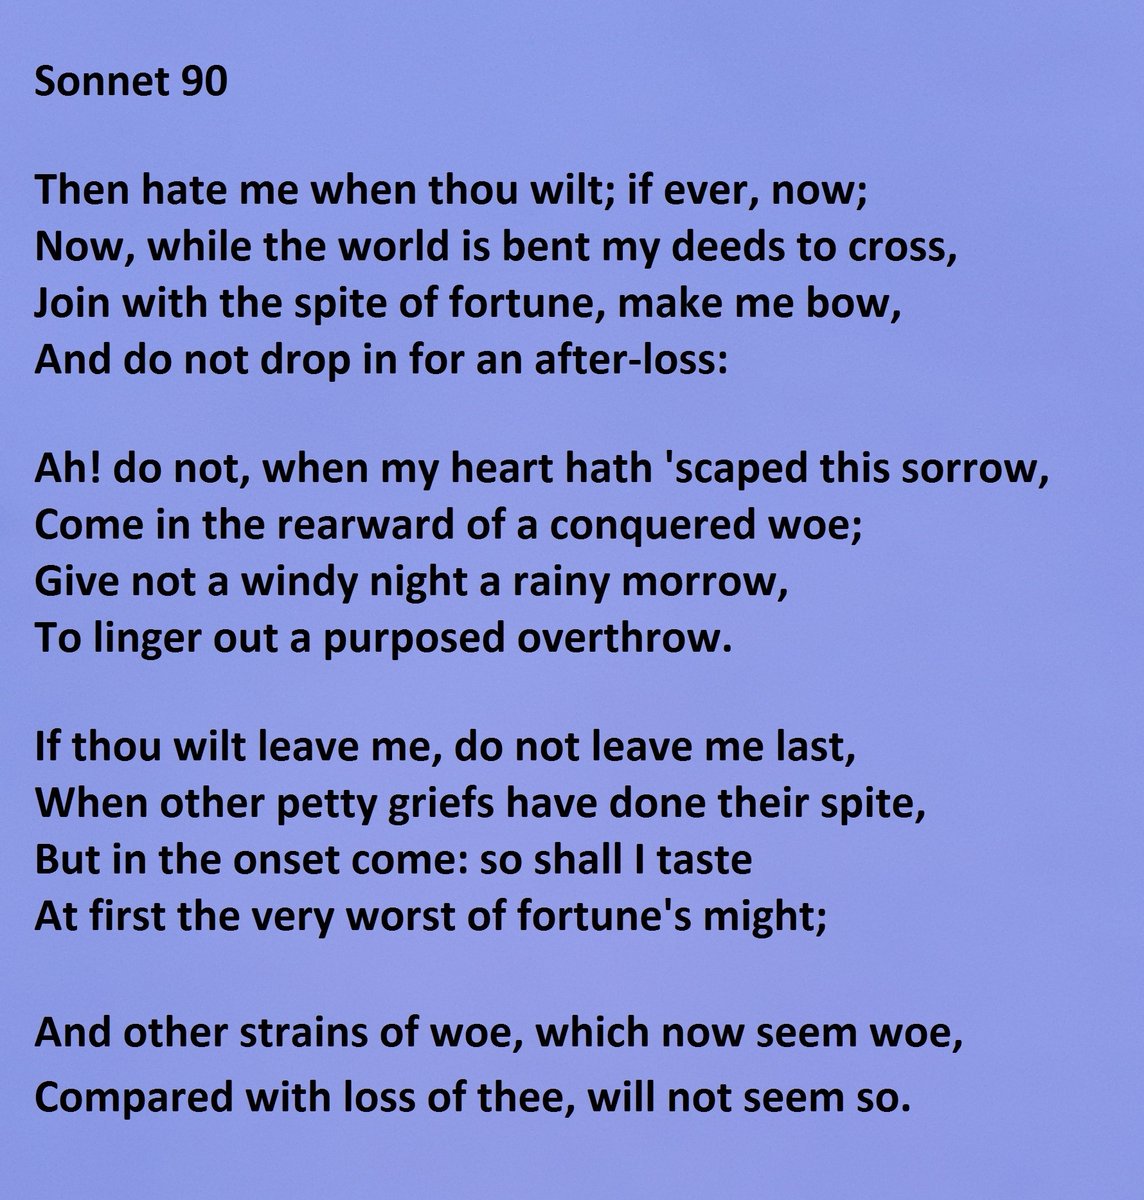 Sonnet 90 by William Shakespeare "Then hate me when thou wilt; if ever, now"